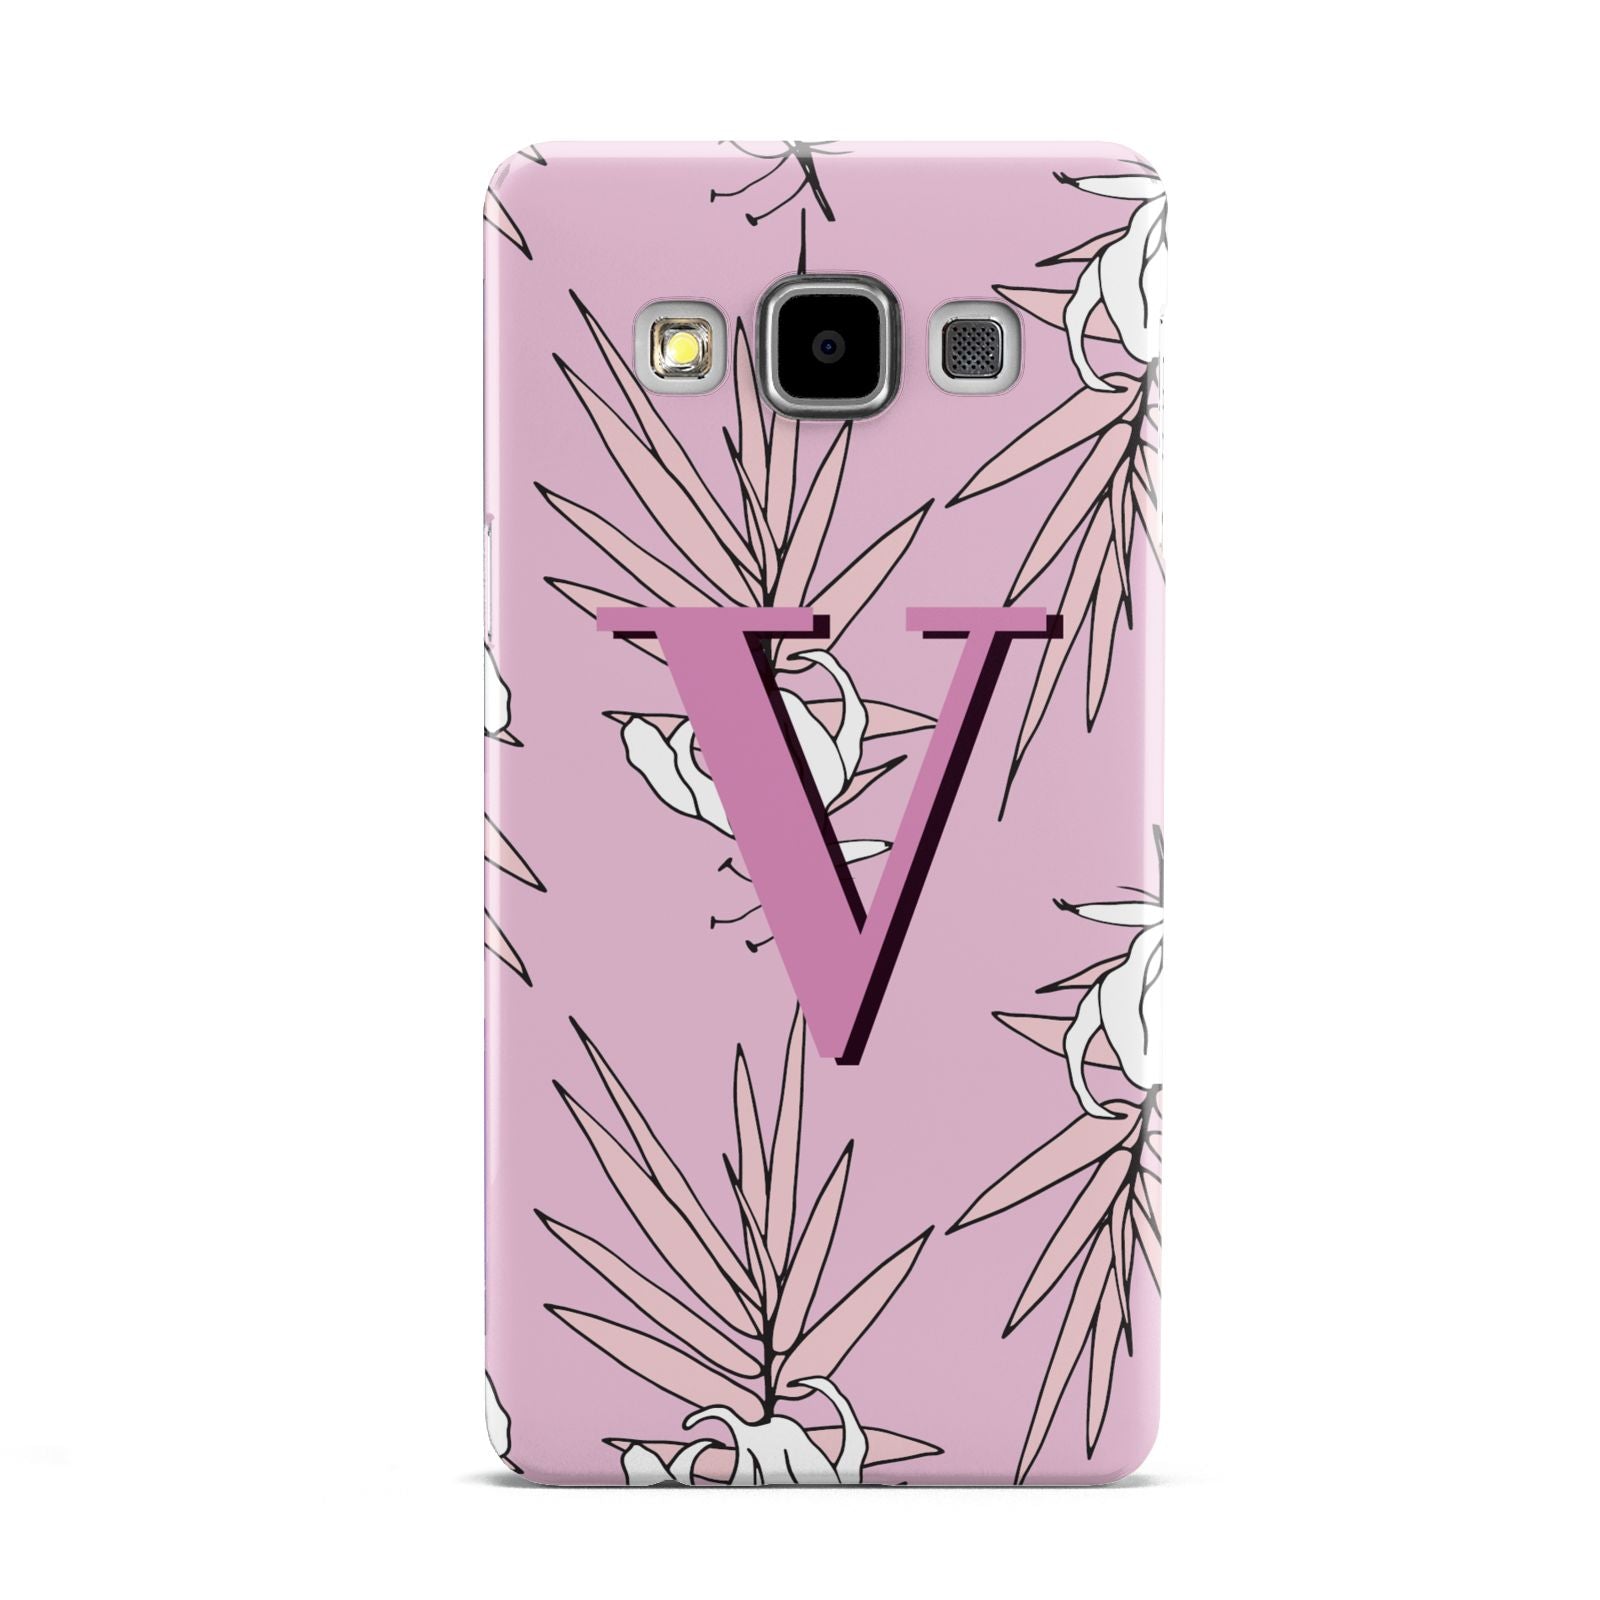 Personalised Pink and White Floral Monogram Samsung Galaxy A5 Case